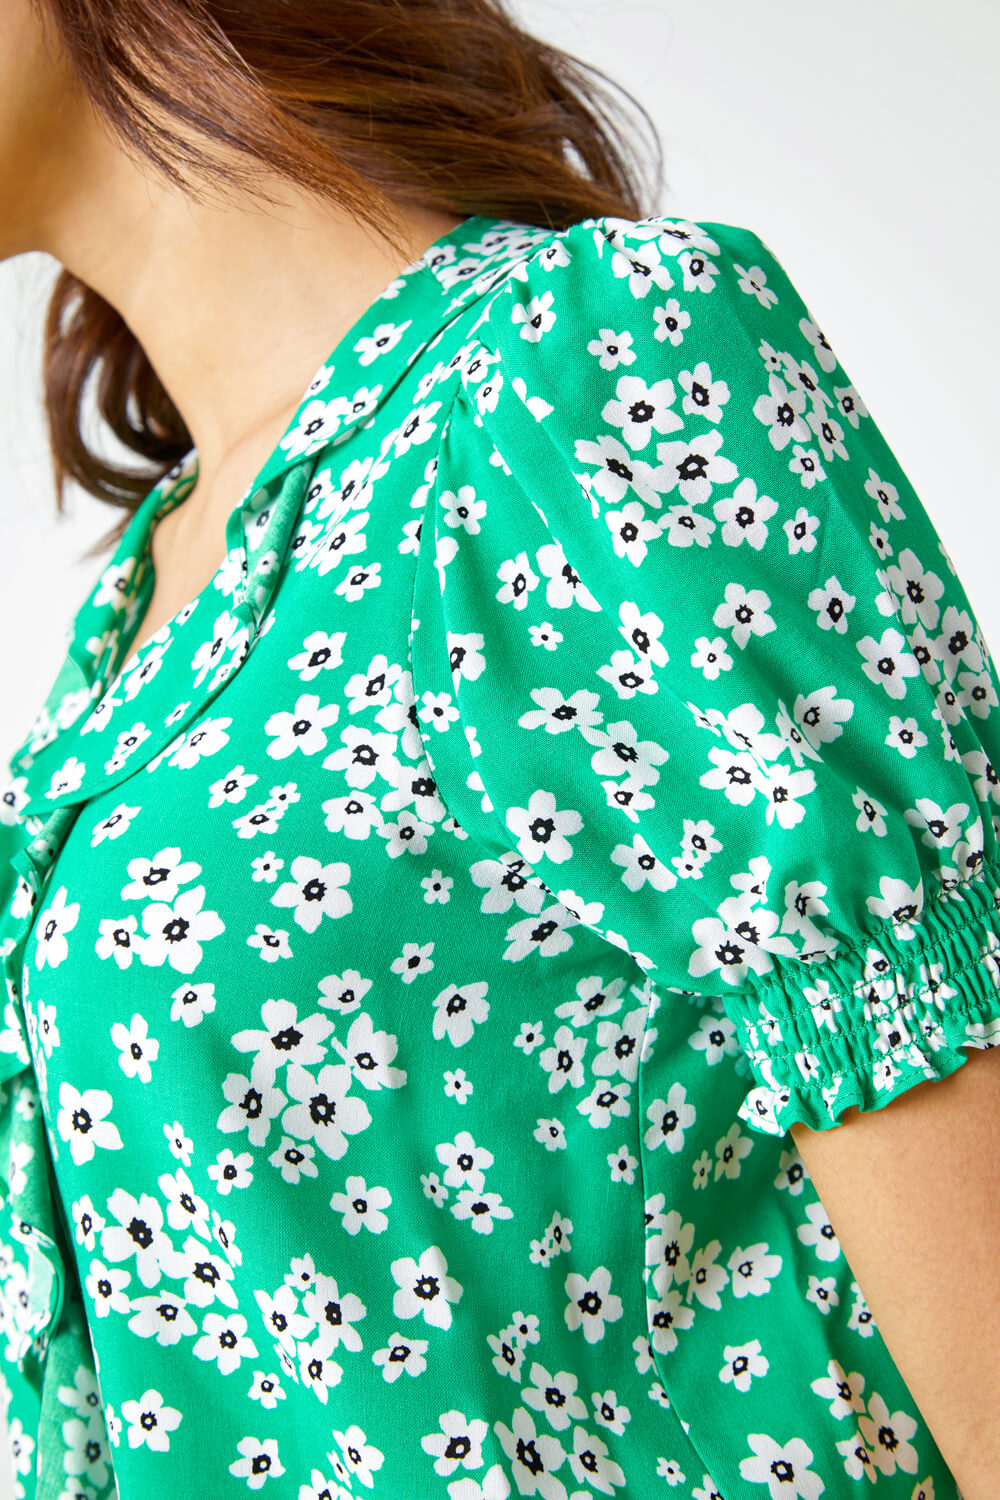 Green Ditsy Floral Print Ruffle Top, Image 5 of 5